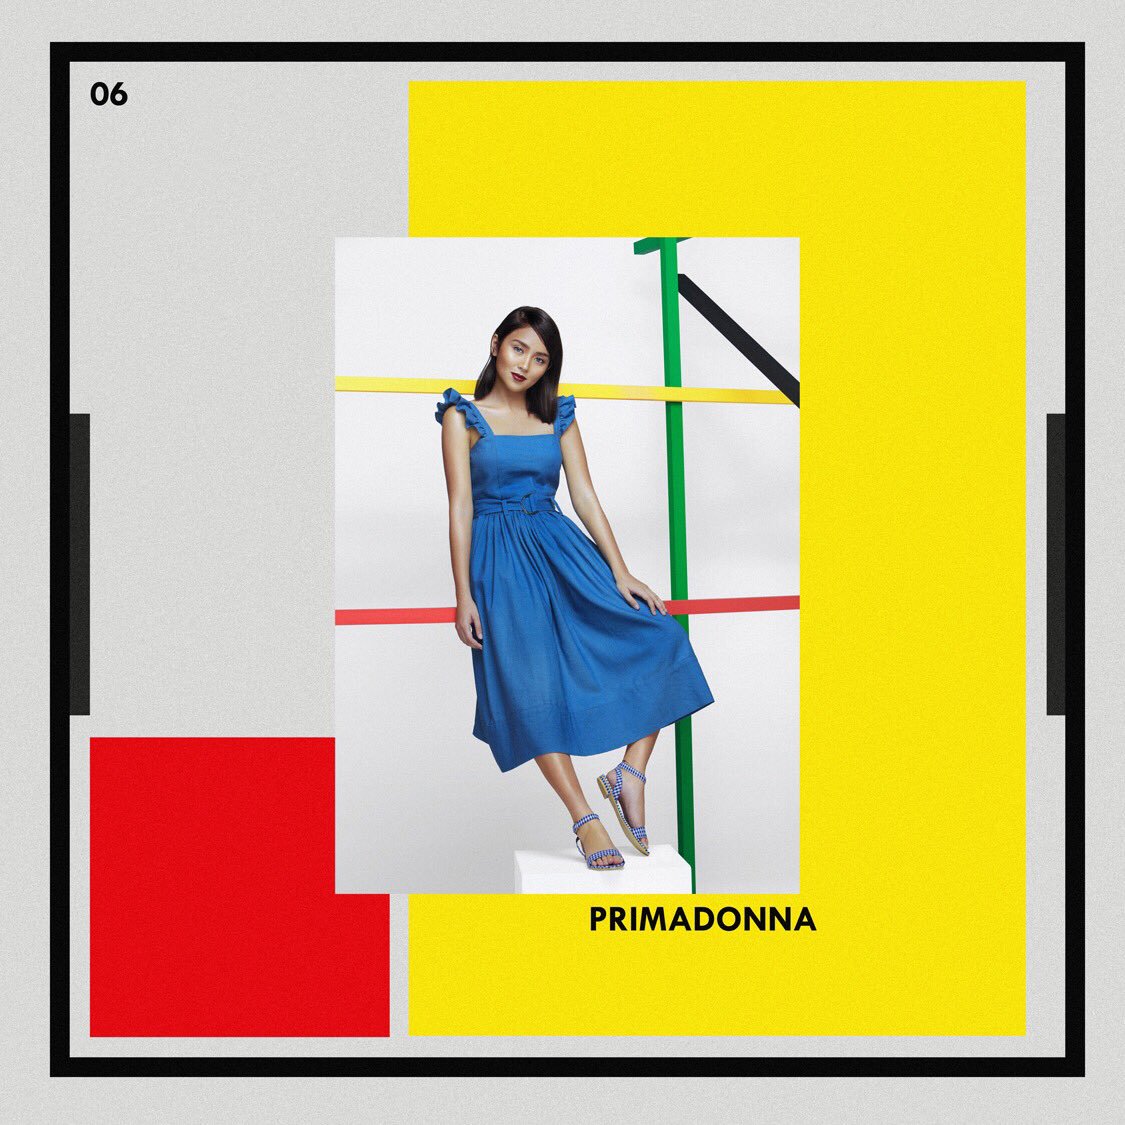 KATH 🐘 on Twitter: "Hi #PrimadonnaGirls! Drop by to Primadonna store near  you and get your pair of Primadonna shoes for this summer season! 🧜‍♀️  #PrimadonnaSummer2018 https://t.co/oM7miWL2Wd" / Twitter